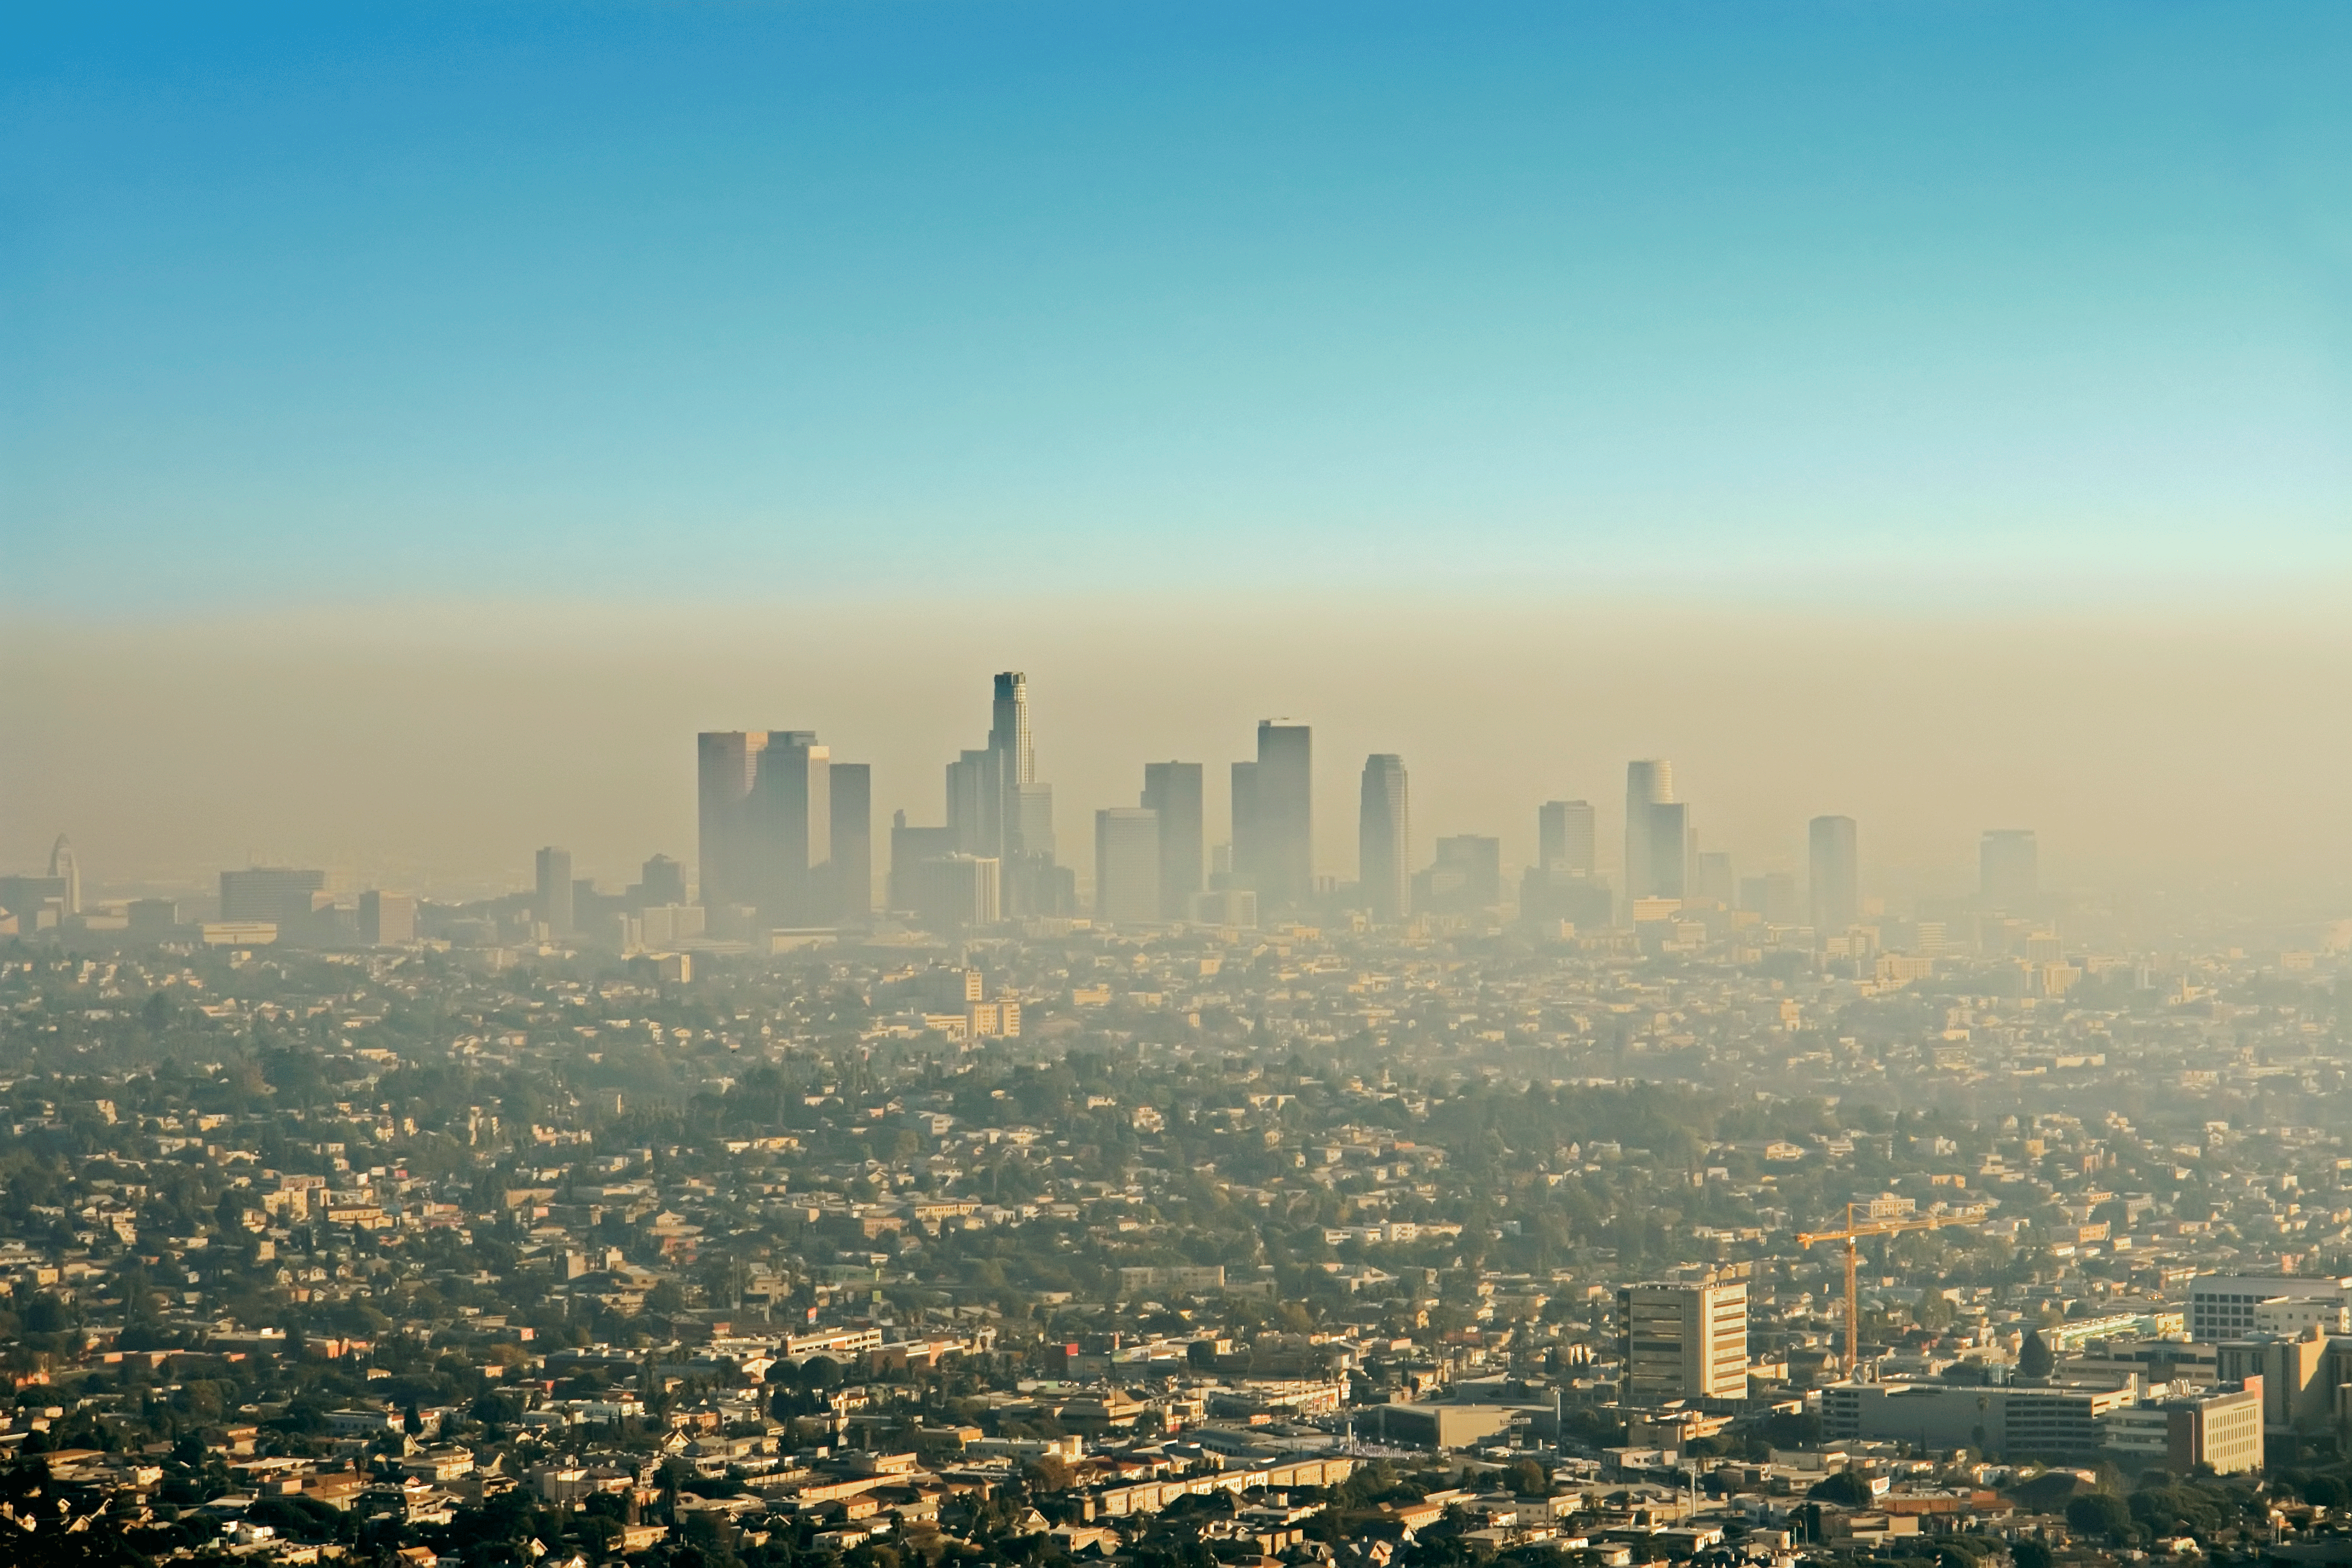 The LA skyline, blanked in a layer of SMOG